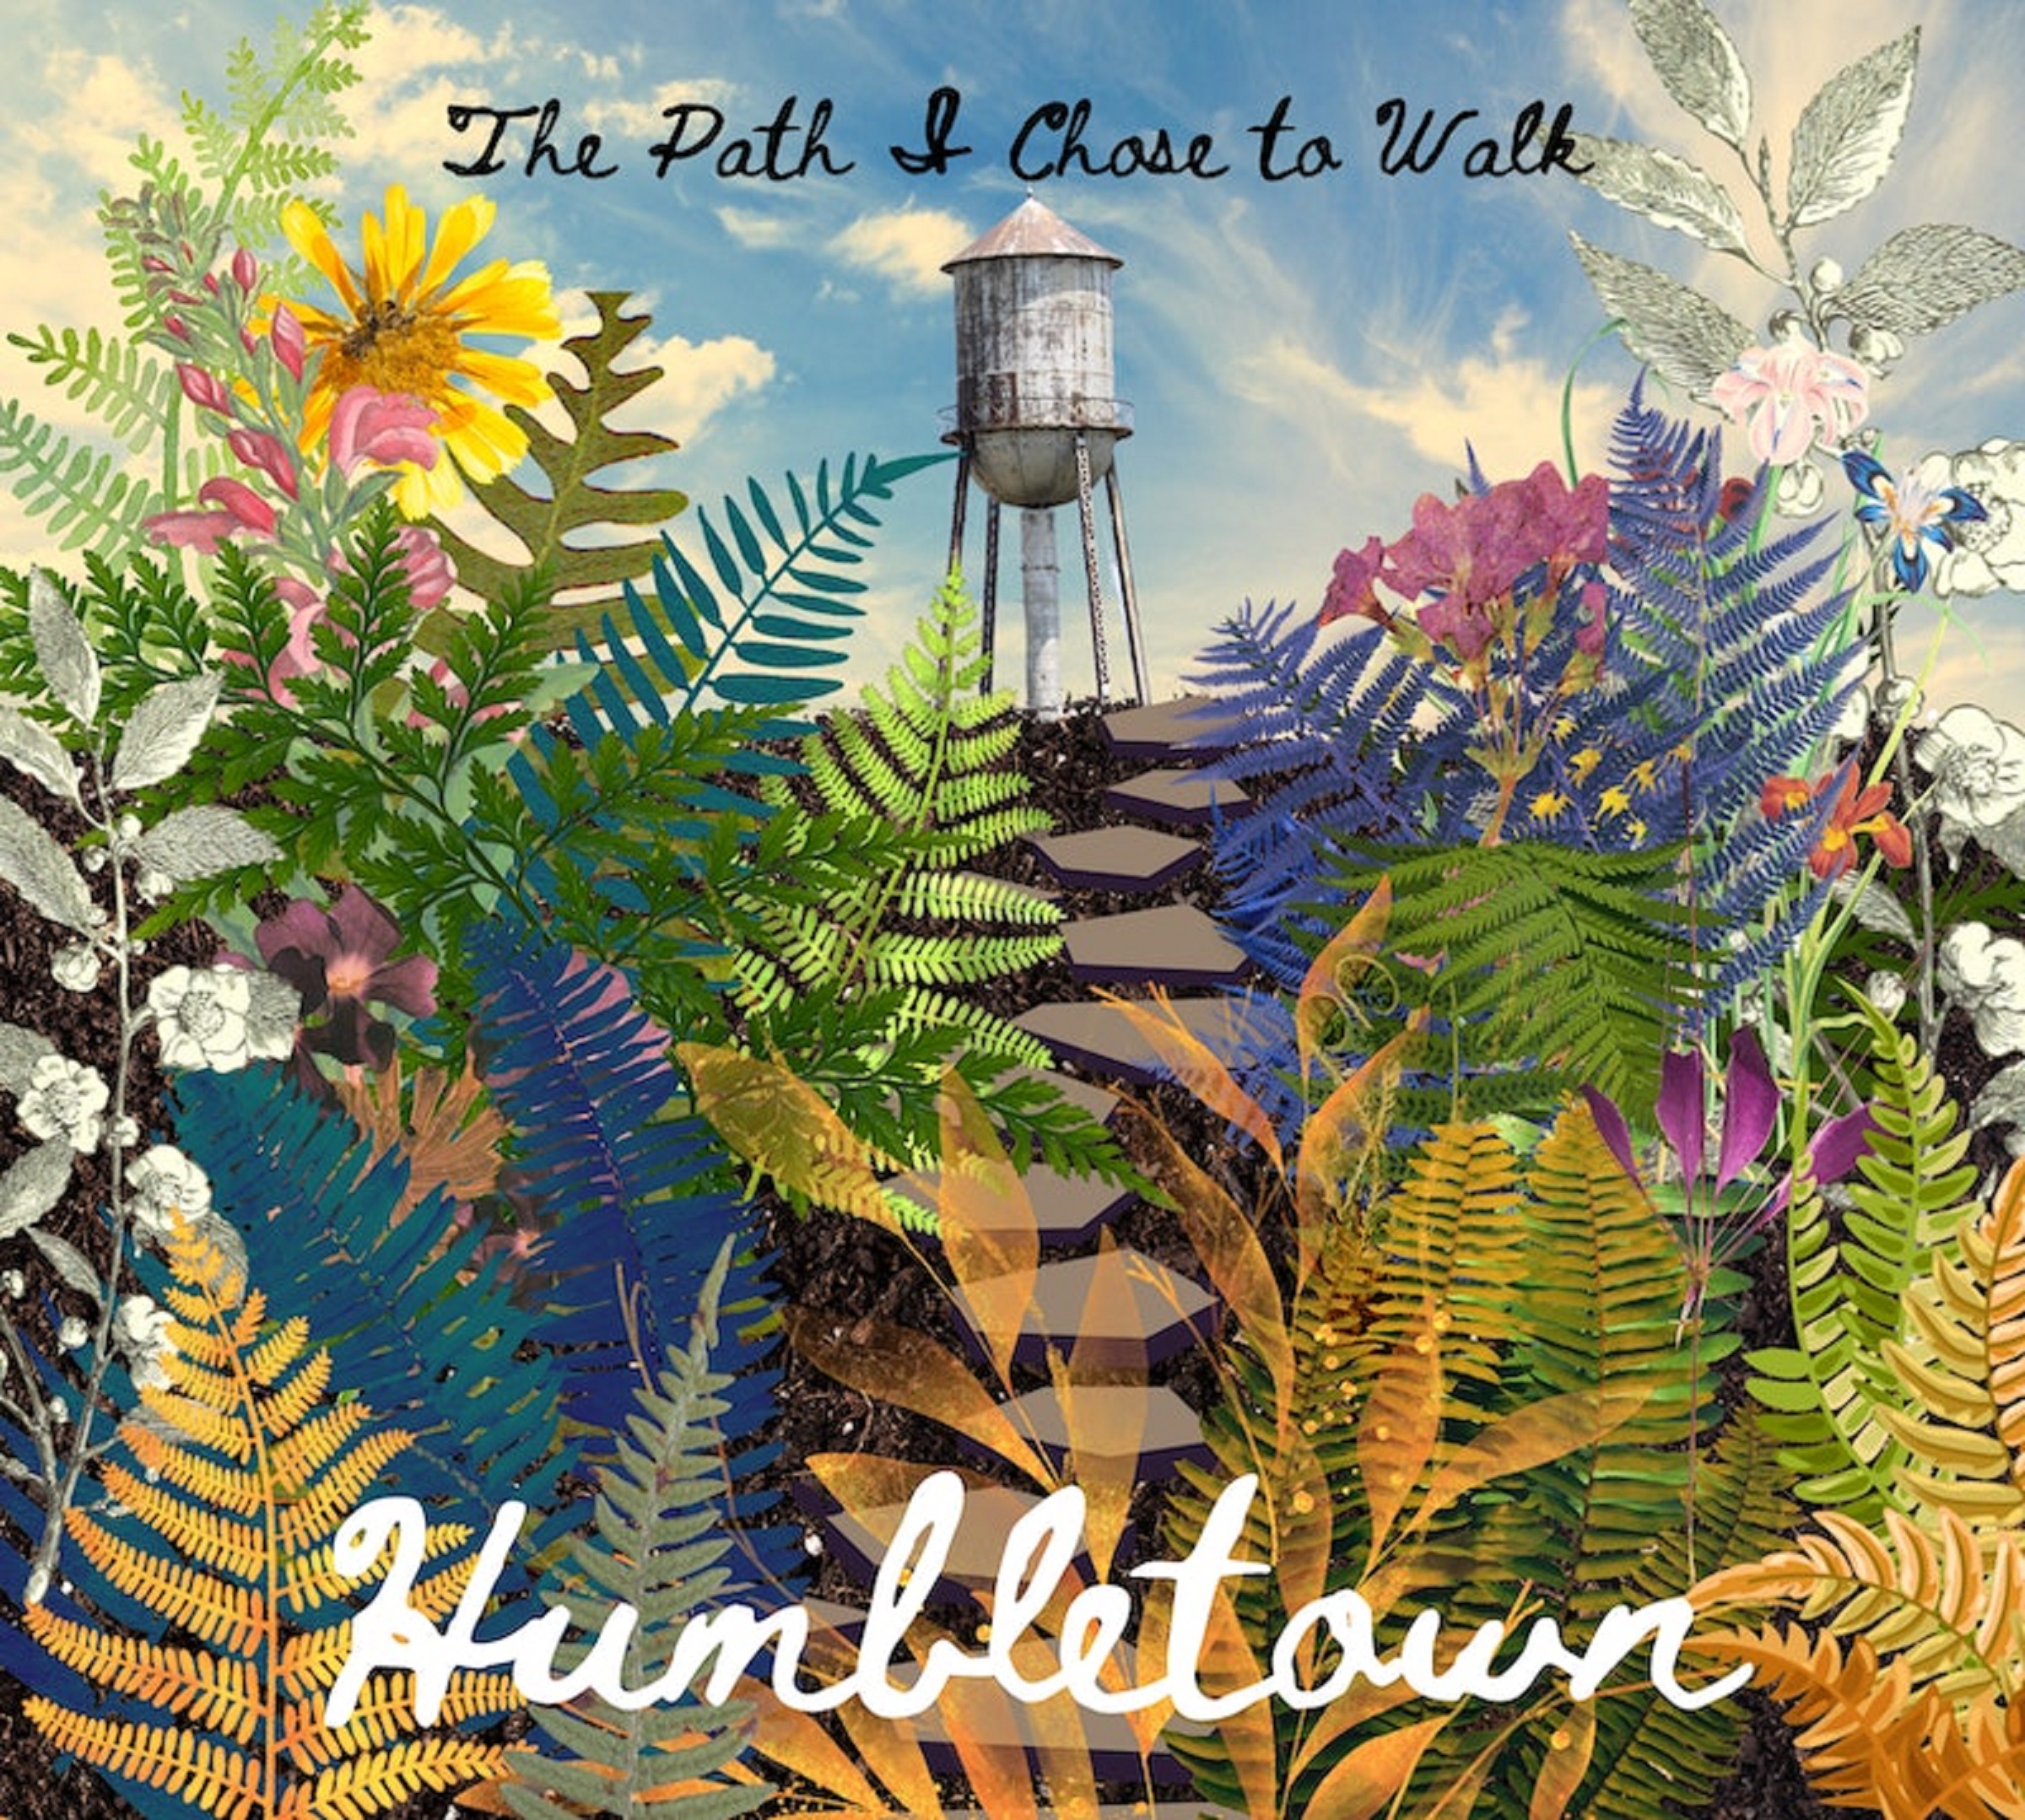 Humbletown just released their new album "The Path I Chose to Walk"